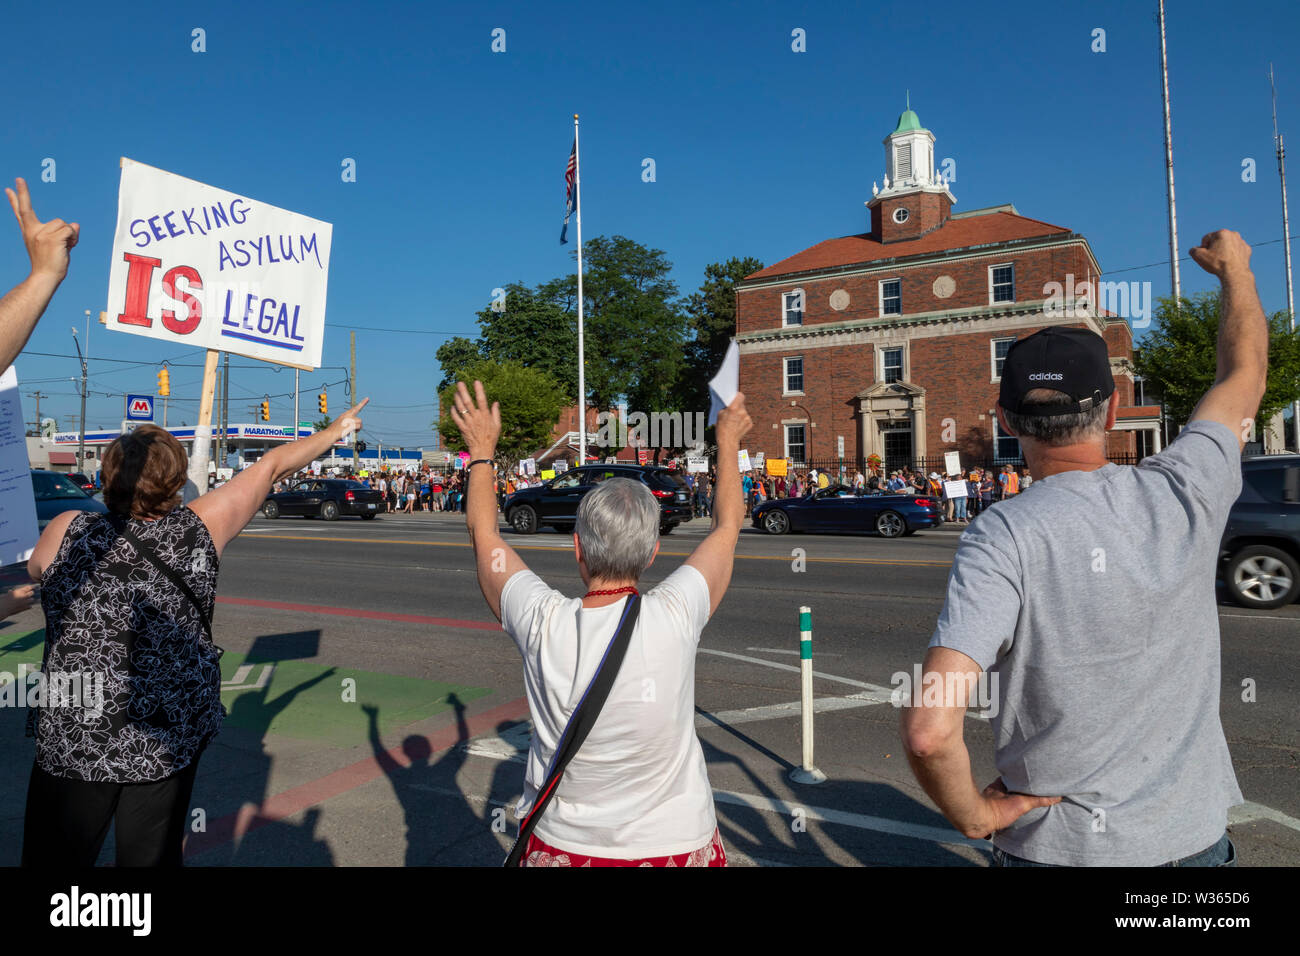 Detroit, Michigan USA - 12 July 2019 - People upset about the separation of immigrant families and the detention of refugees and small children lined Stock Photo